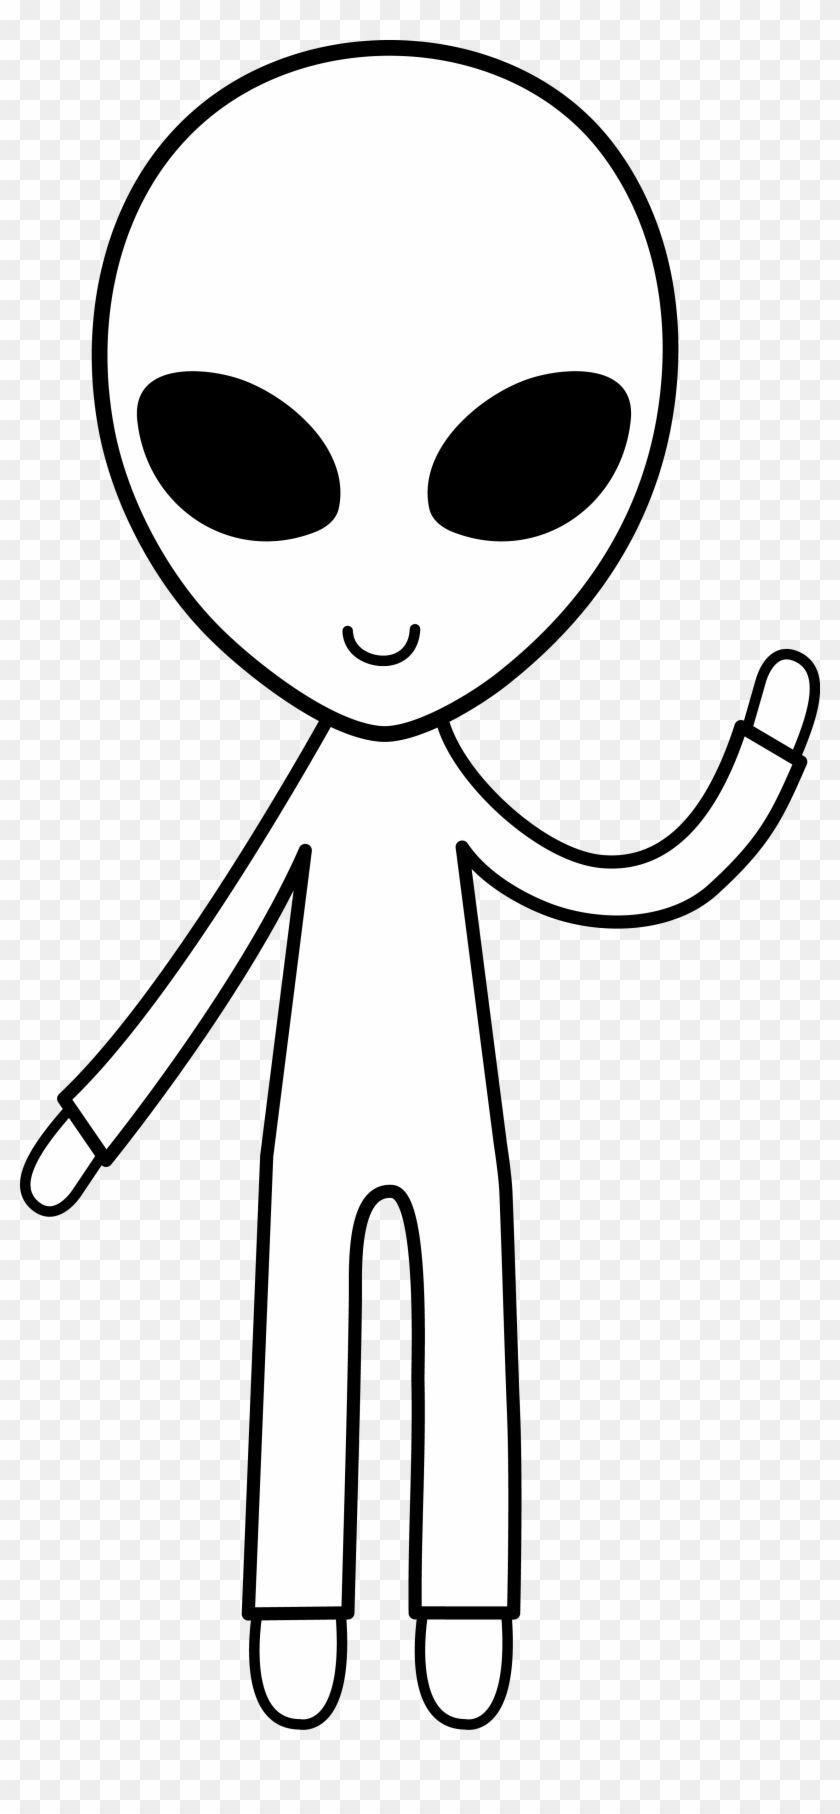 Black and White Alien Logo - Cartoon Alien Black And White Transparent PNG Clipart Image